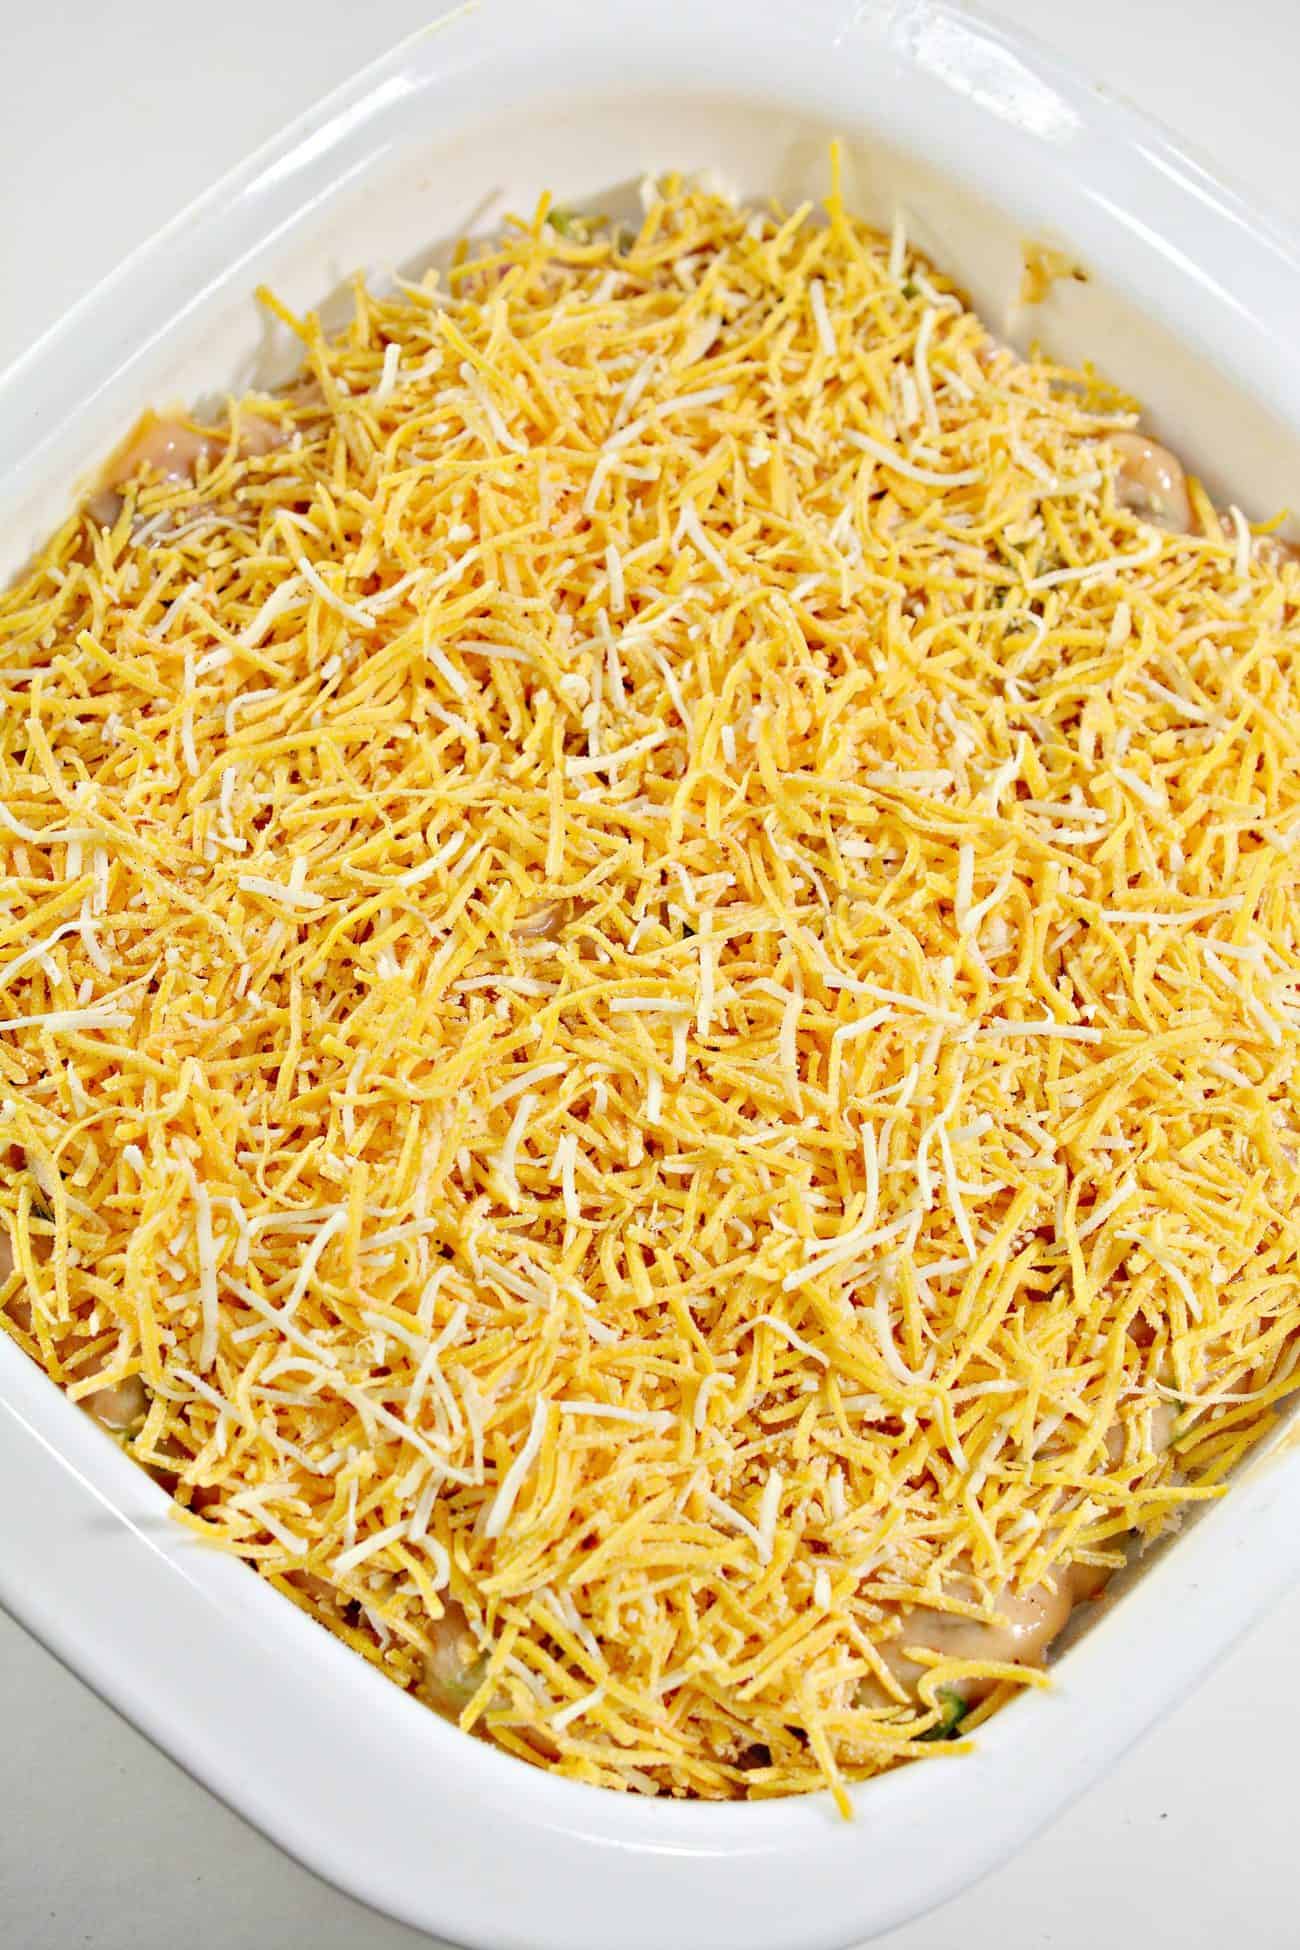 add the remaining cheese on top.